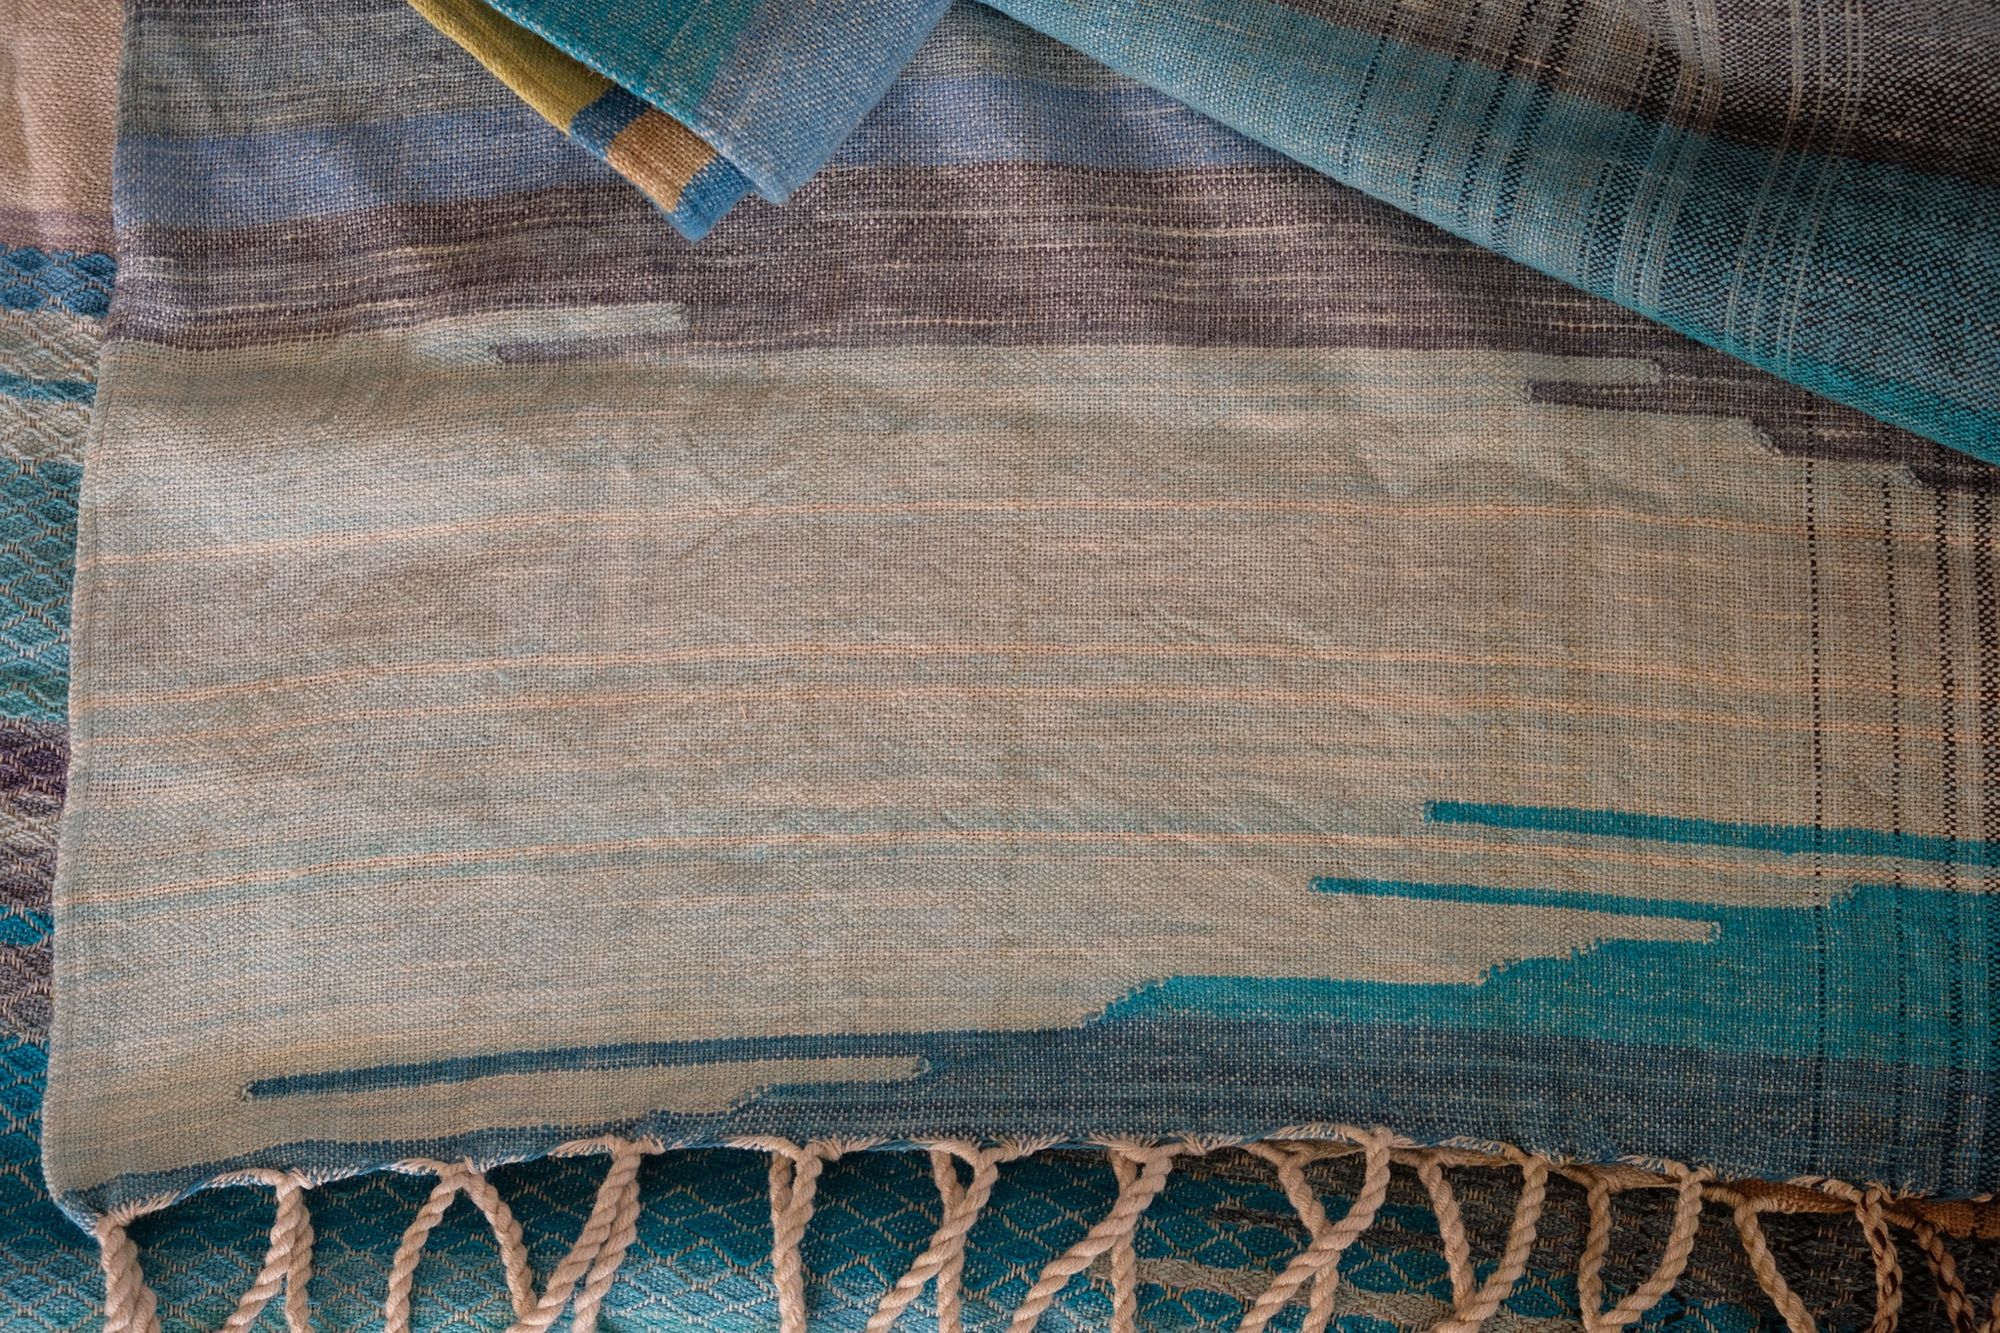 Details of Handwoven fabric in all shades of blue, with details of white and golden yellow, laid out on a wood floor.